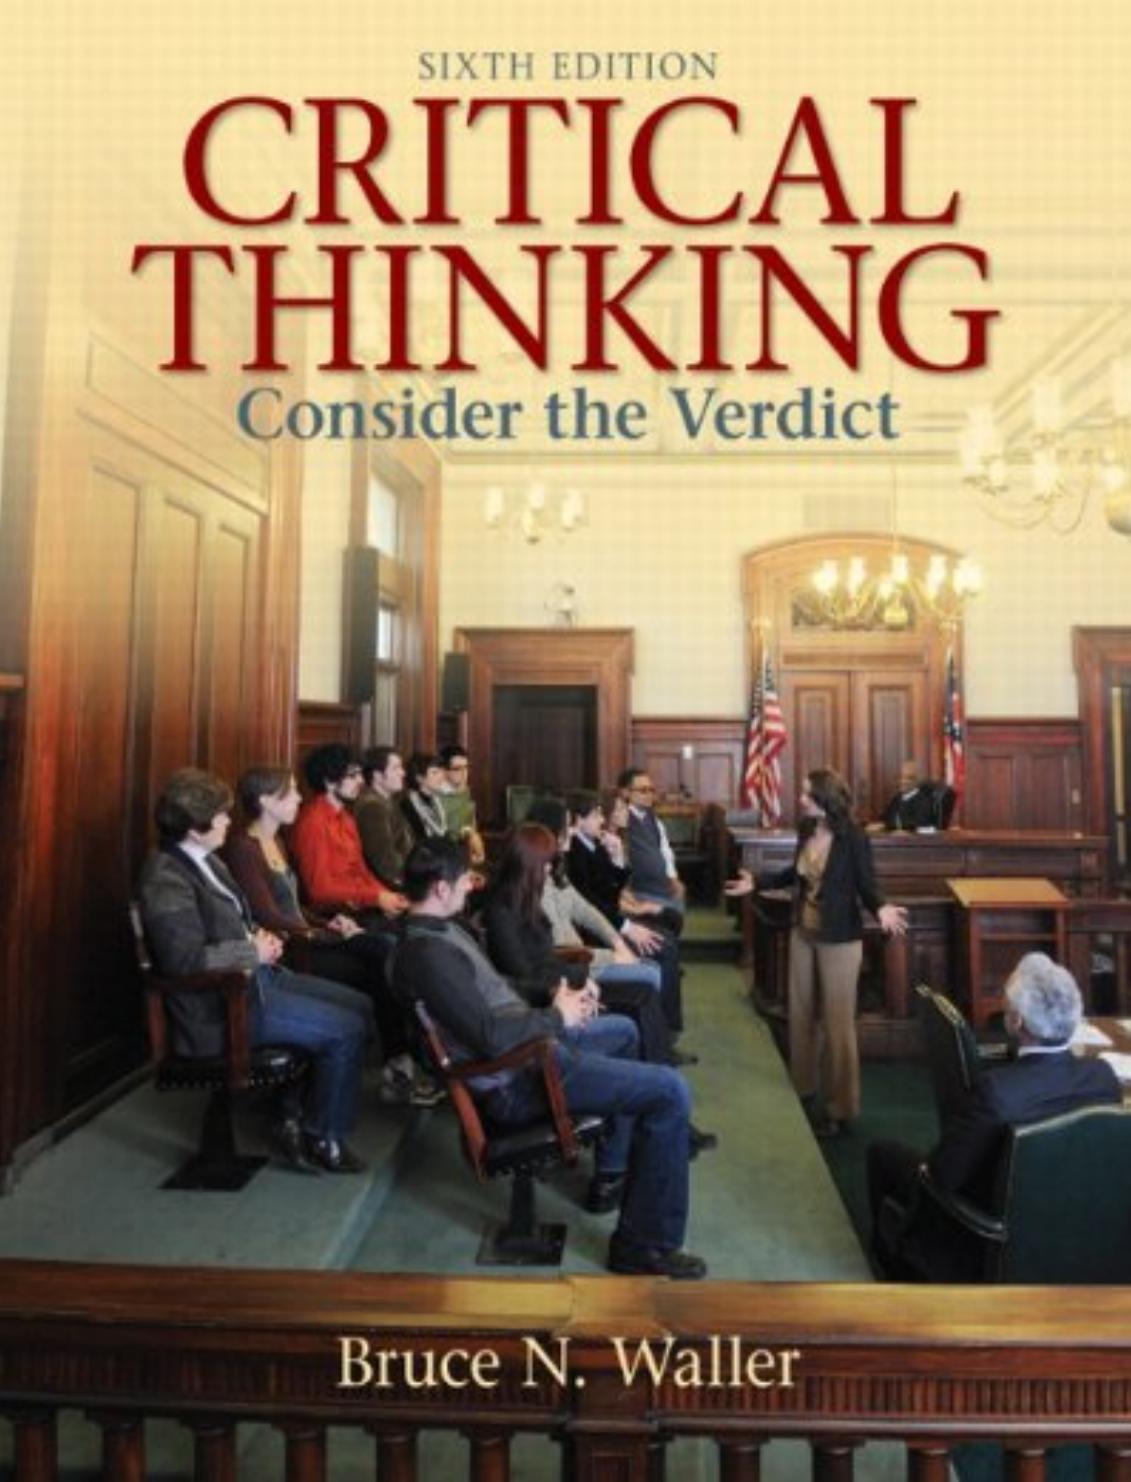 CRITICAL THINKING  Consider the Verdict Sixth Edition ( PDFDrive.com )